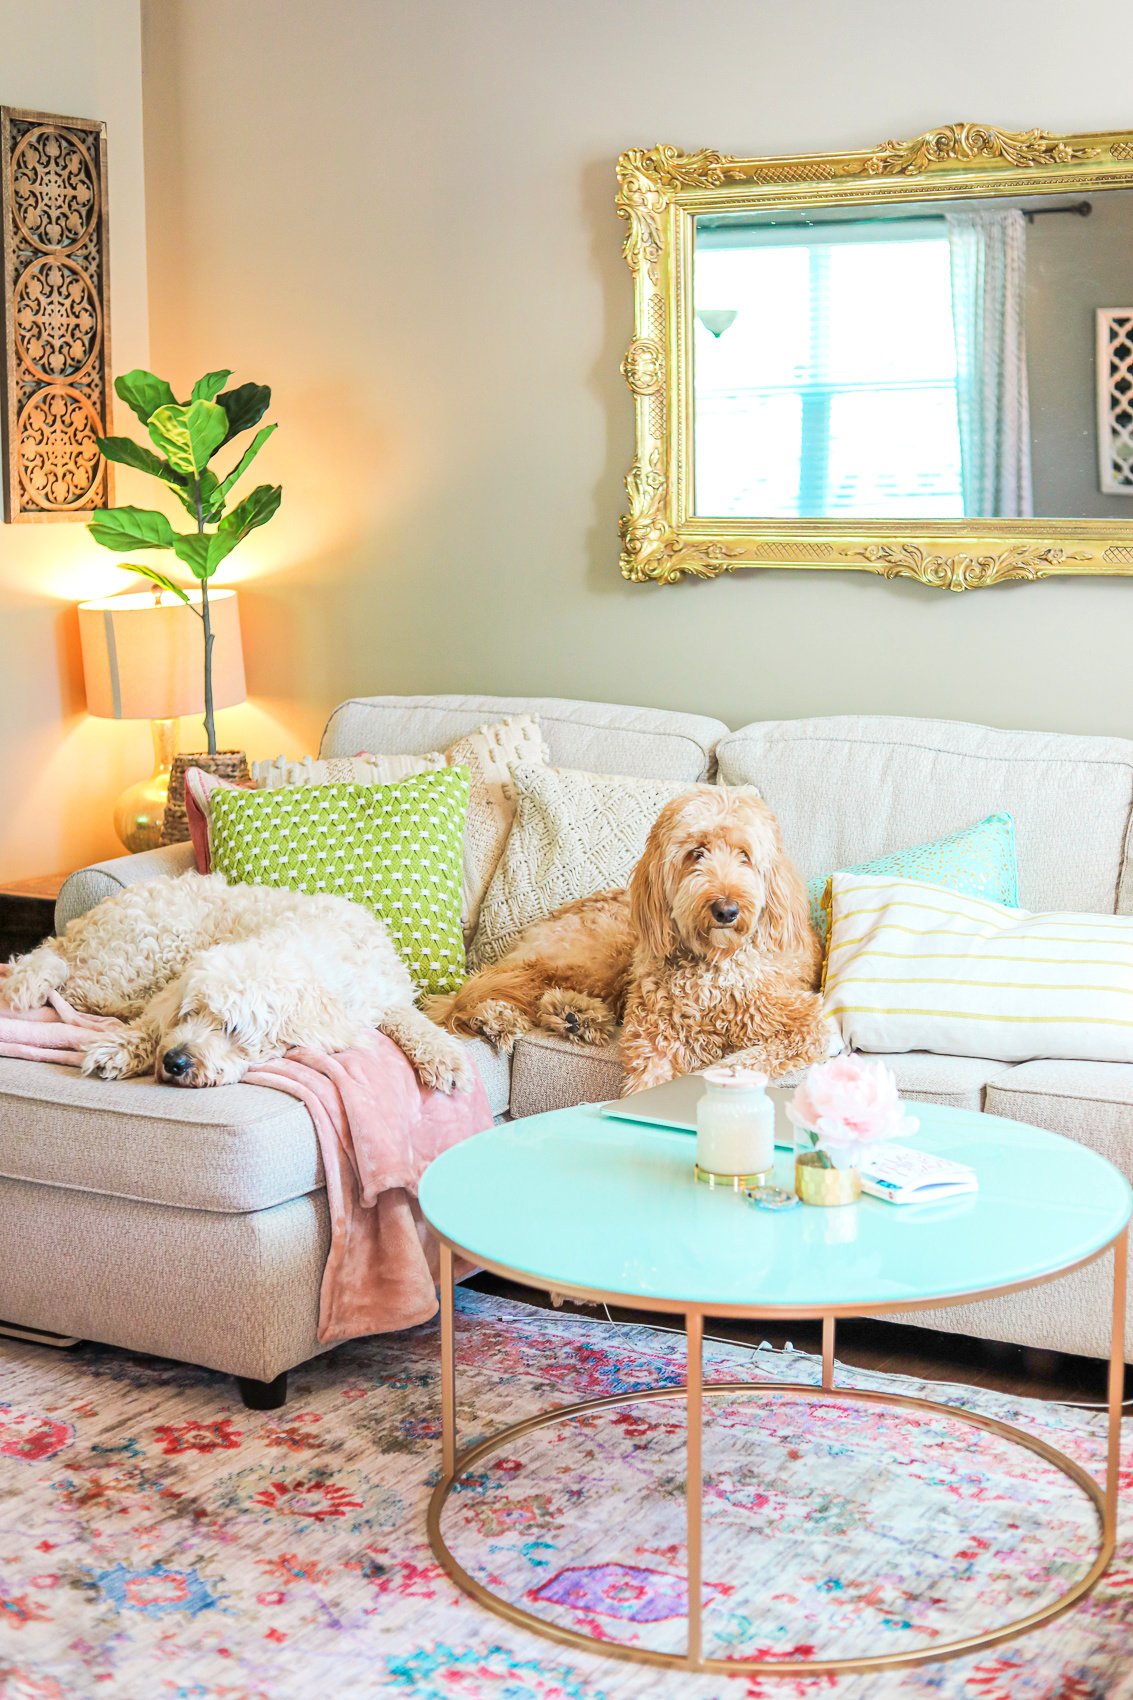 living room decor, home decor, simply taralynn, colorful, southern chic, creamy colorful living room, home decor, remodel, colorful living room, cozy, pillows, chairs, entertainment center decor, plants, floral, vintage, home design, interior, decorations, summer feel